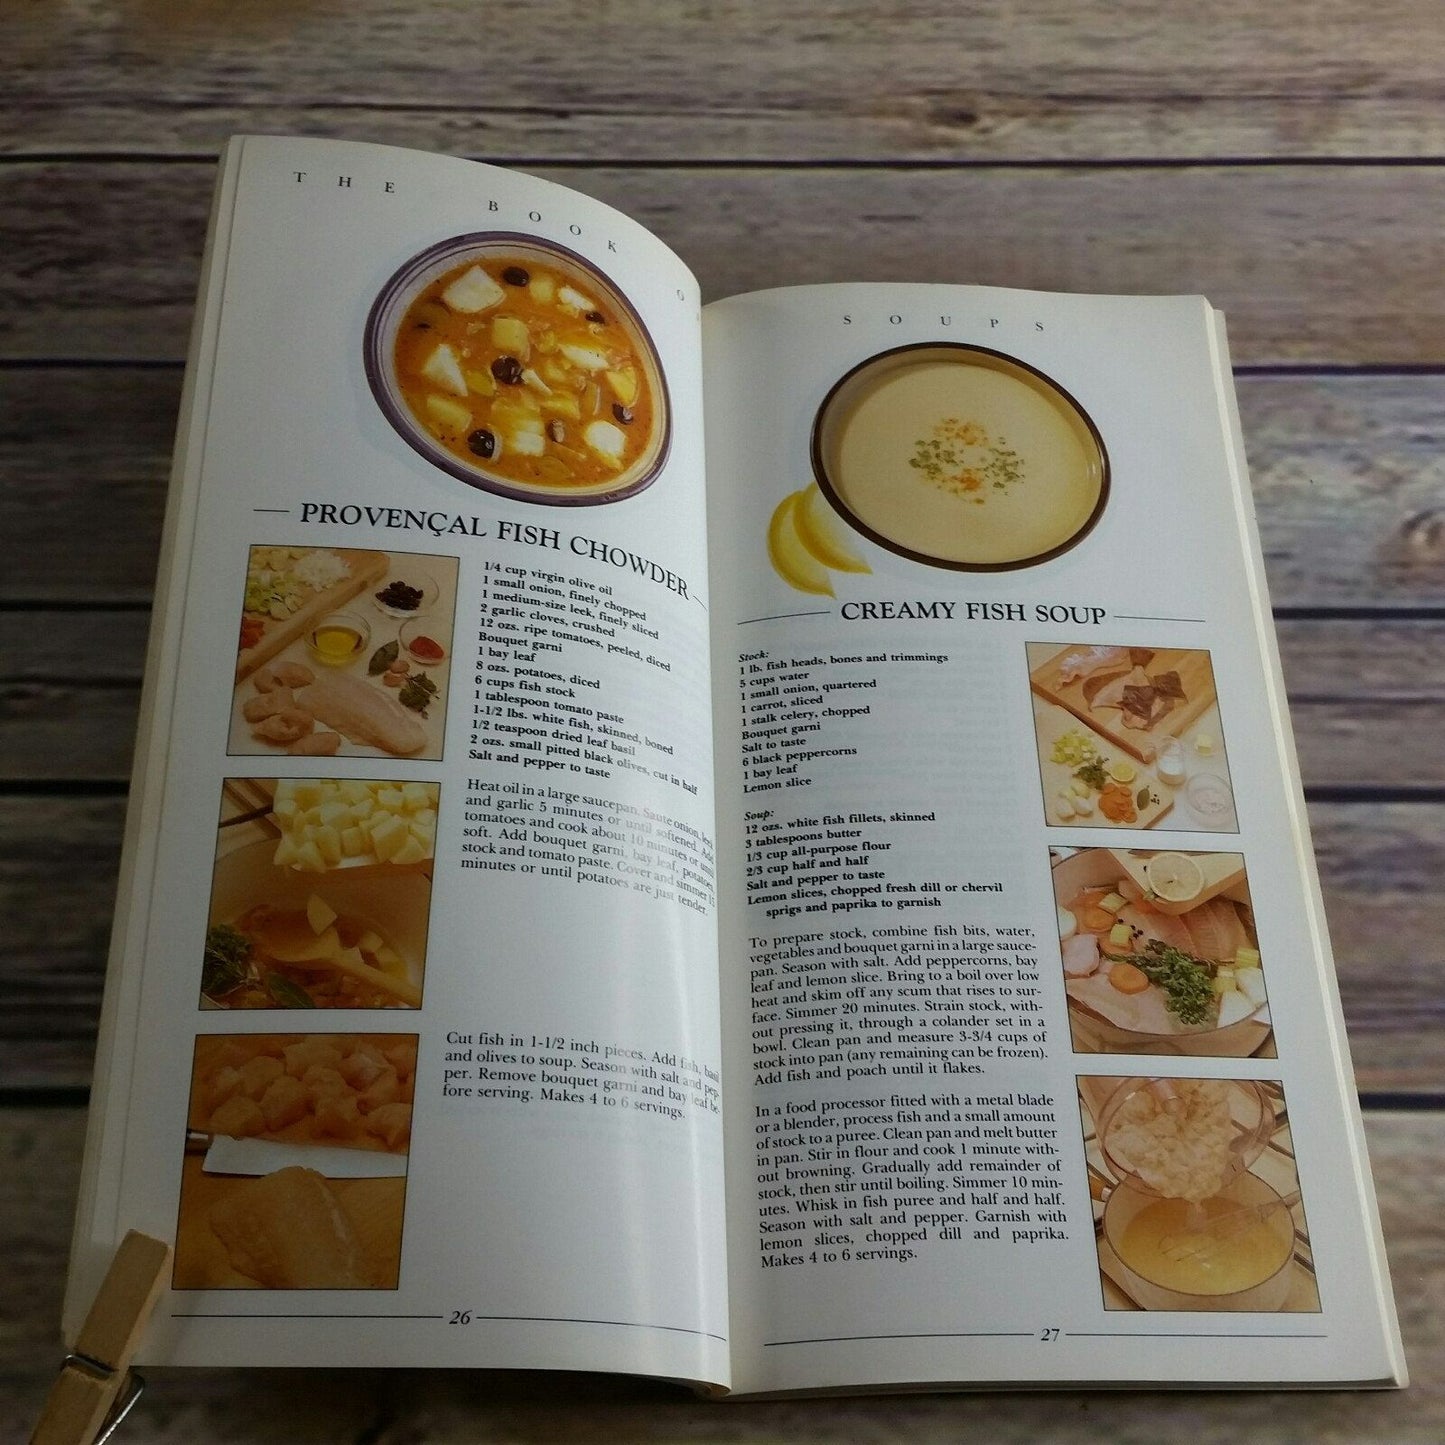 Vintage Cookbook The Book of Soups Recipes 1989 HP Books Lorna Rhodes Paperback